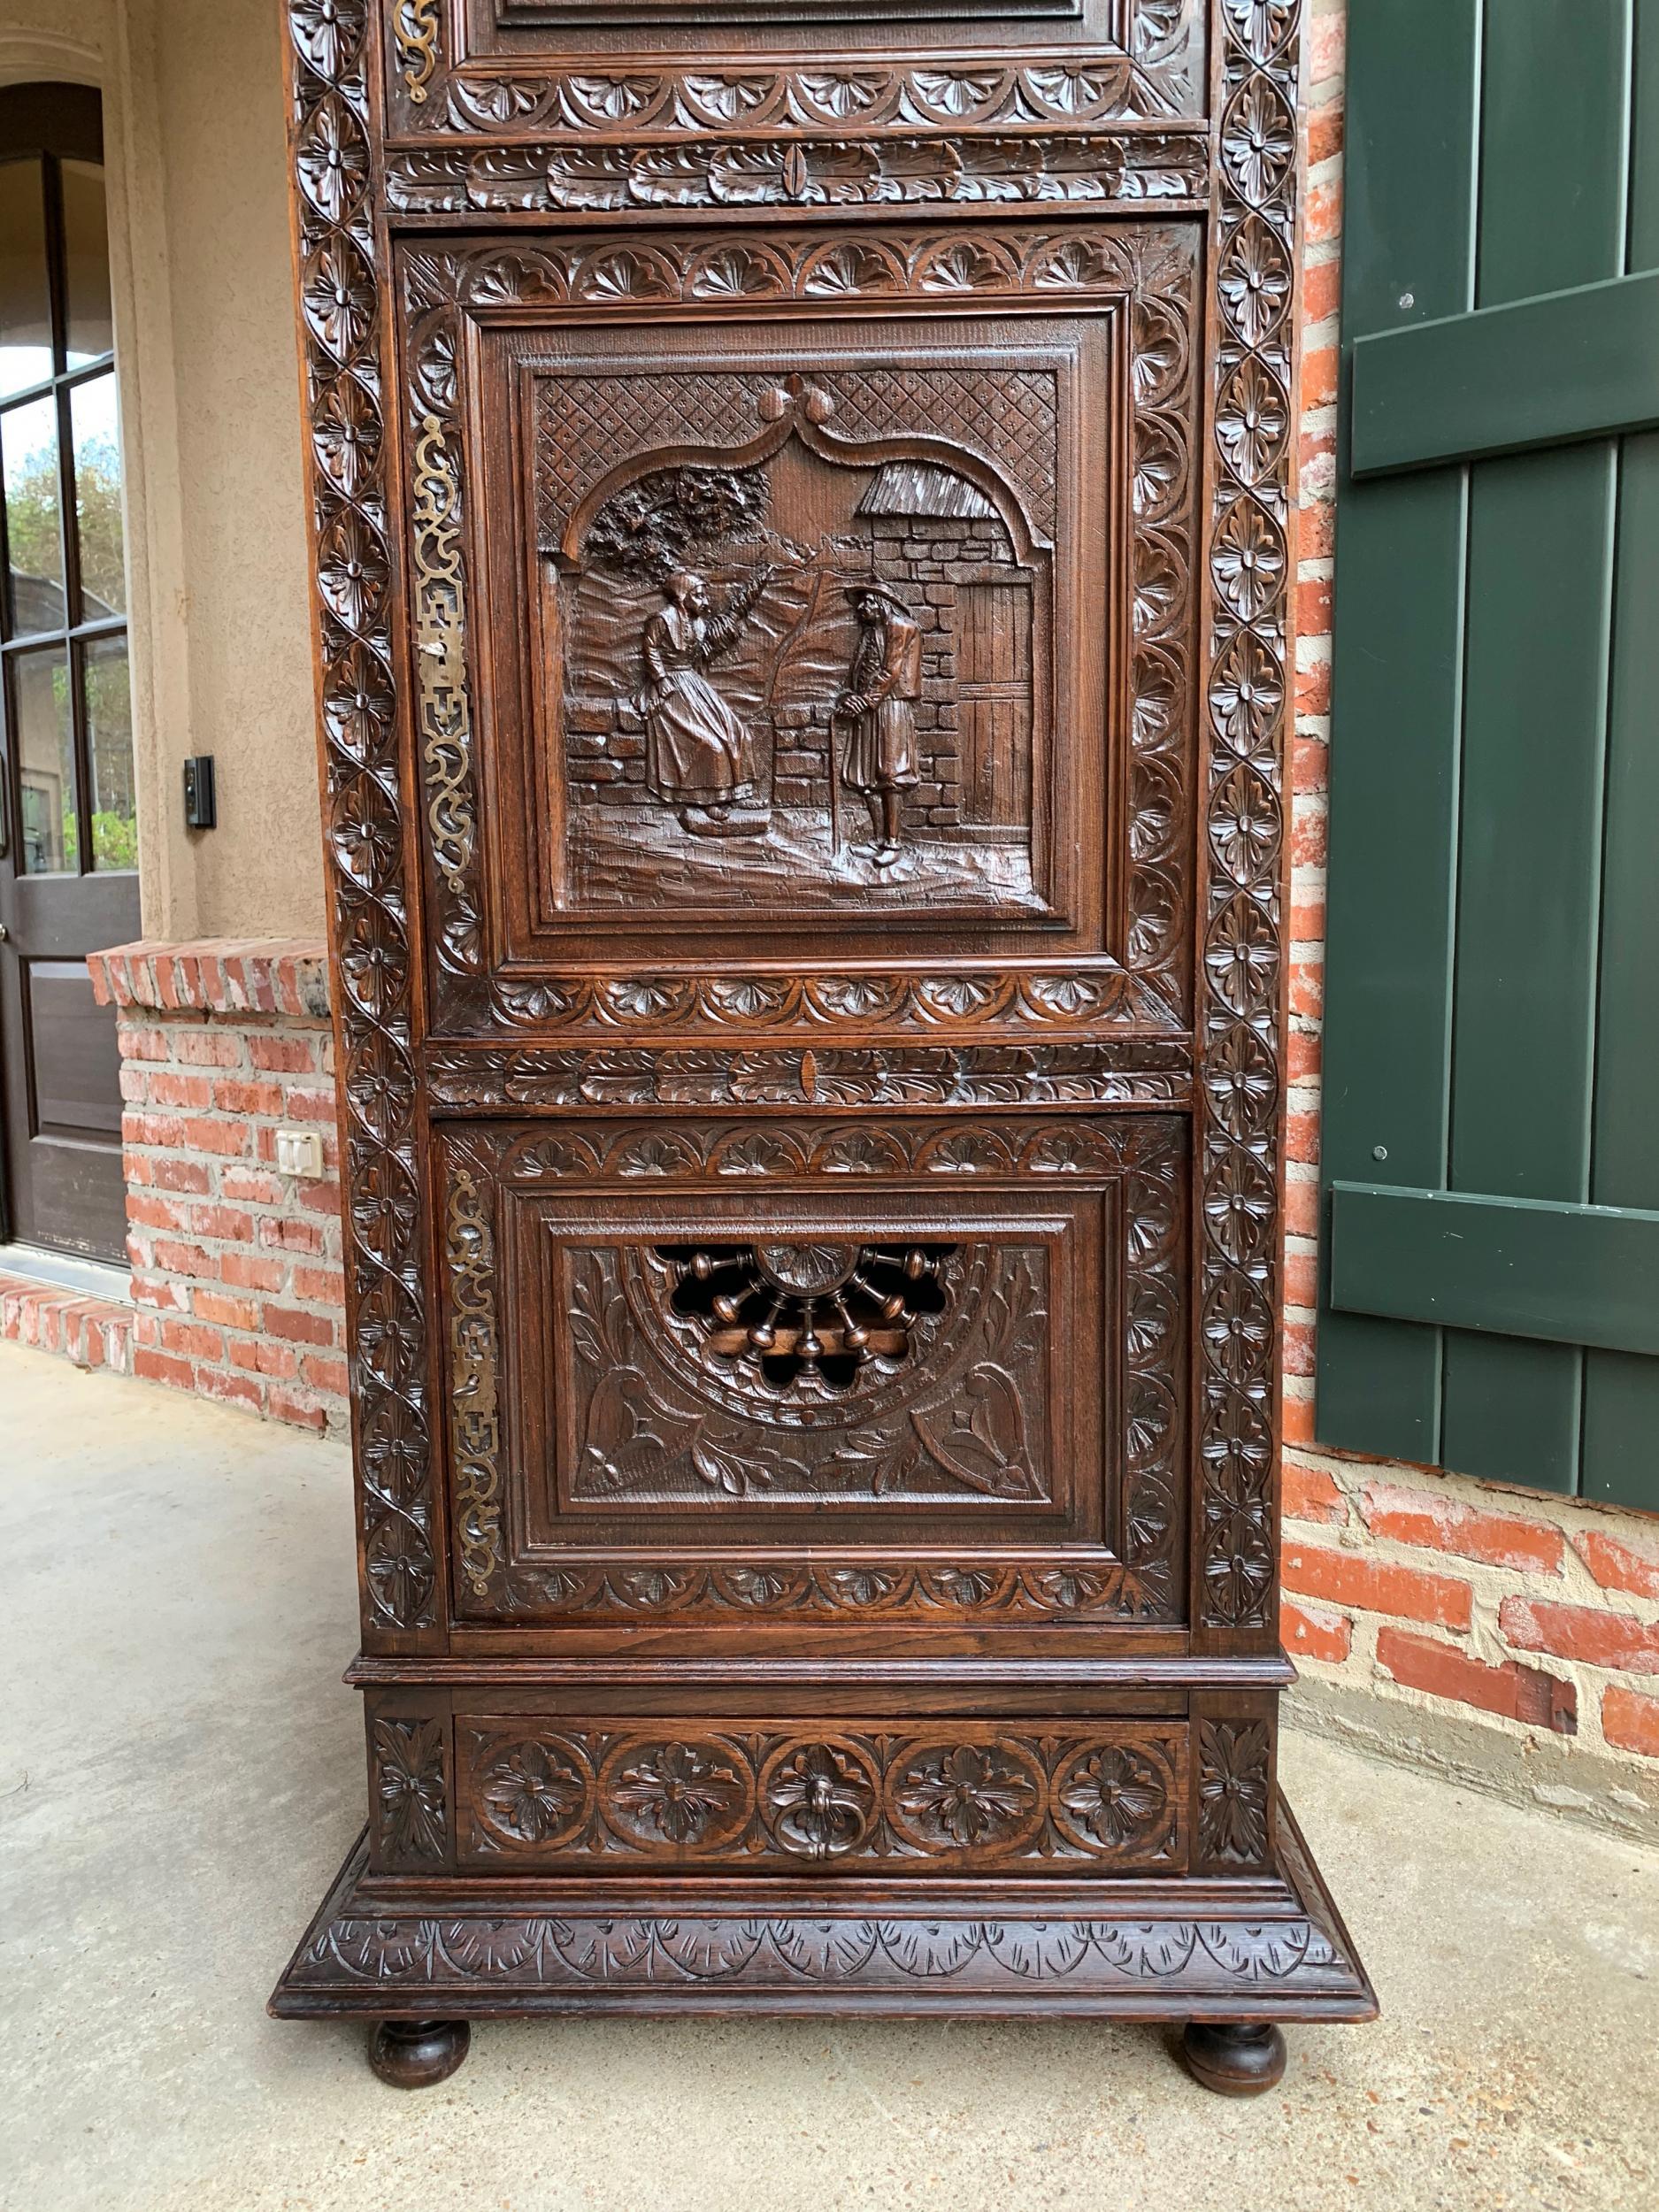 French Provincial 19th Century French Carved Bonnetiere Armoire Cabinet Brittany Breton Wardrobe